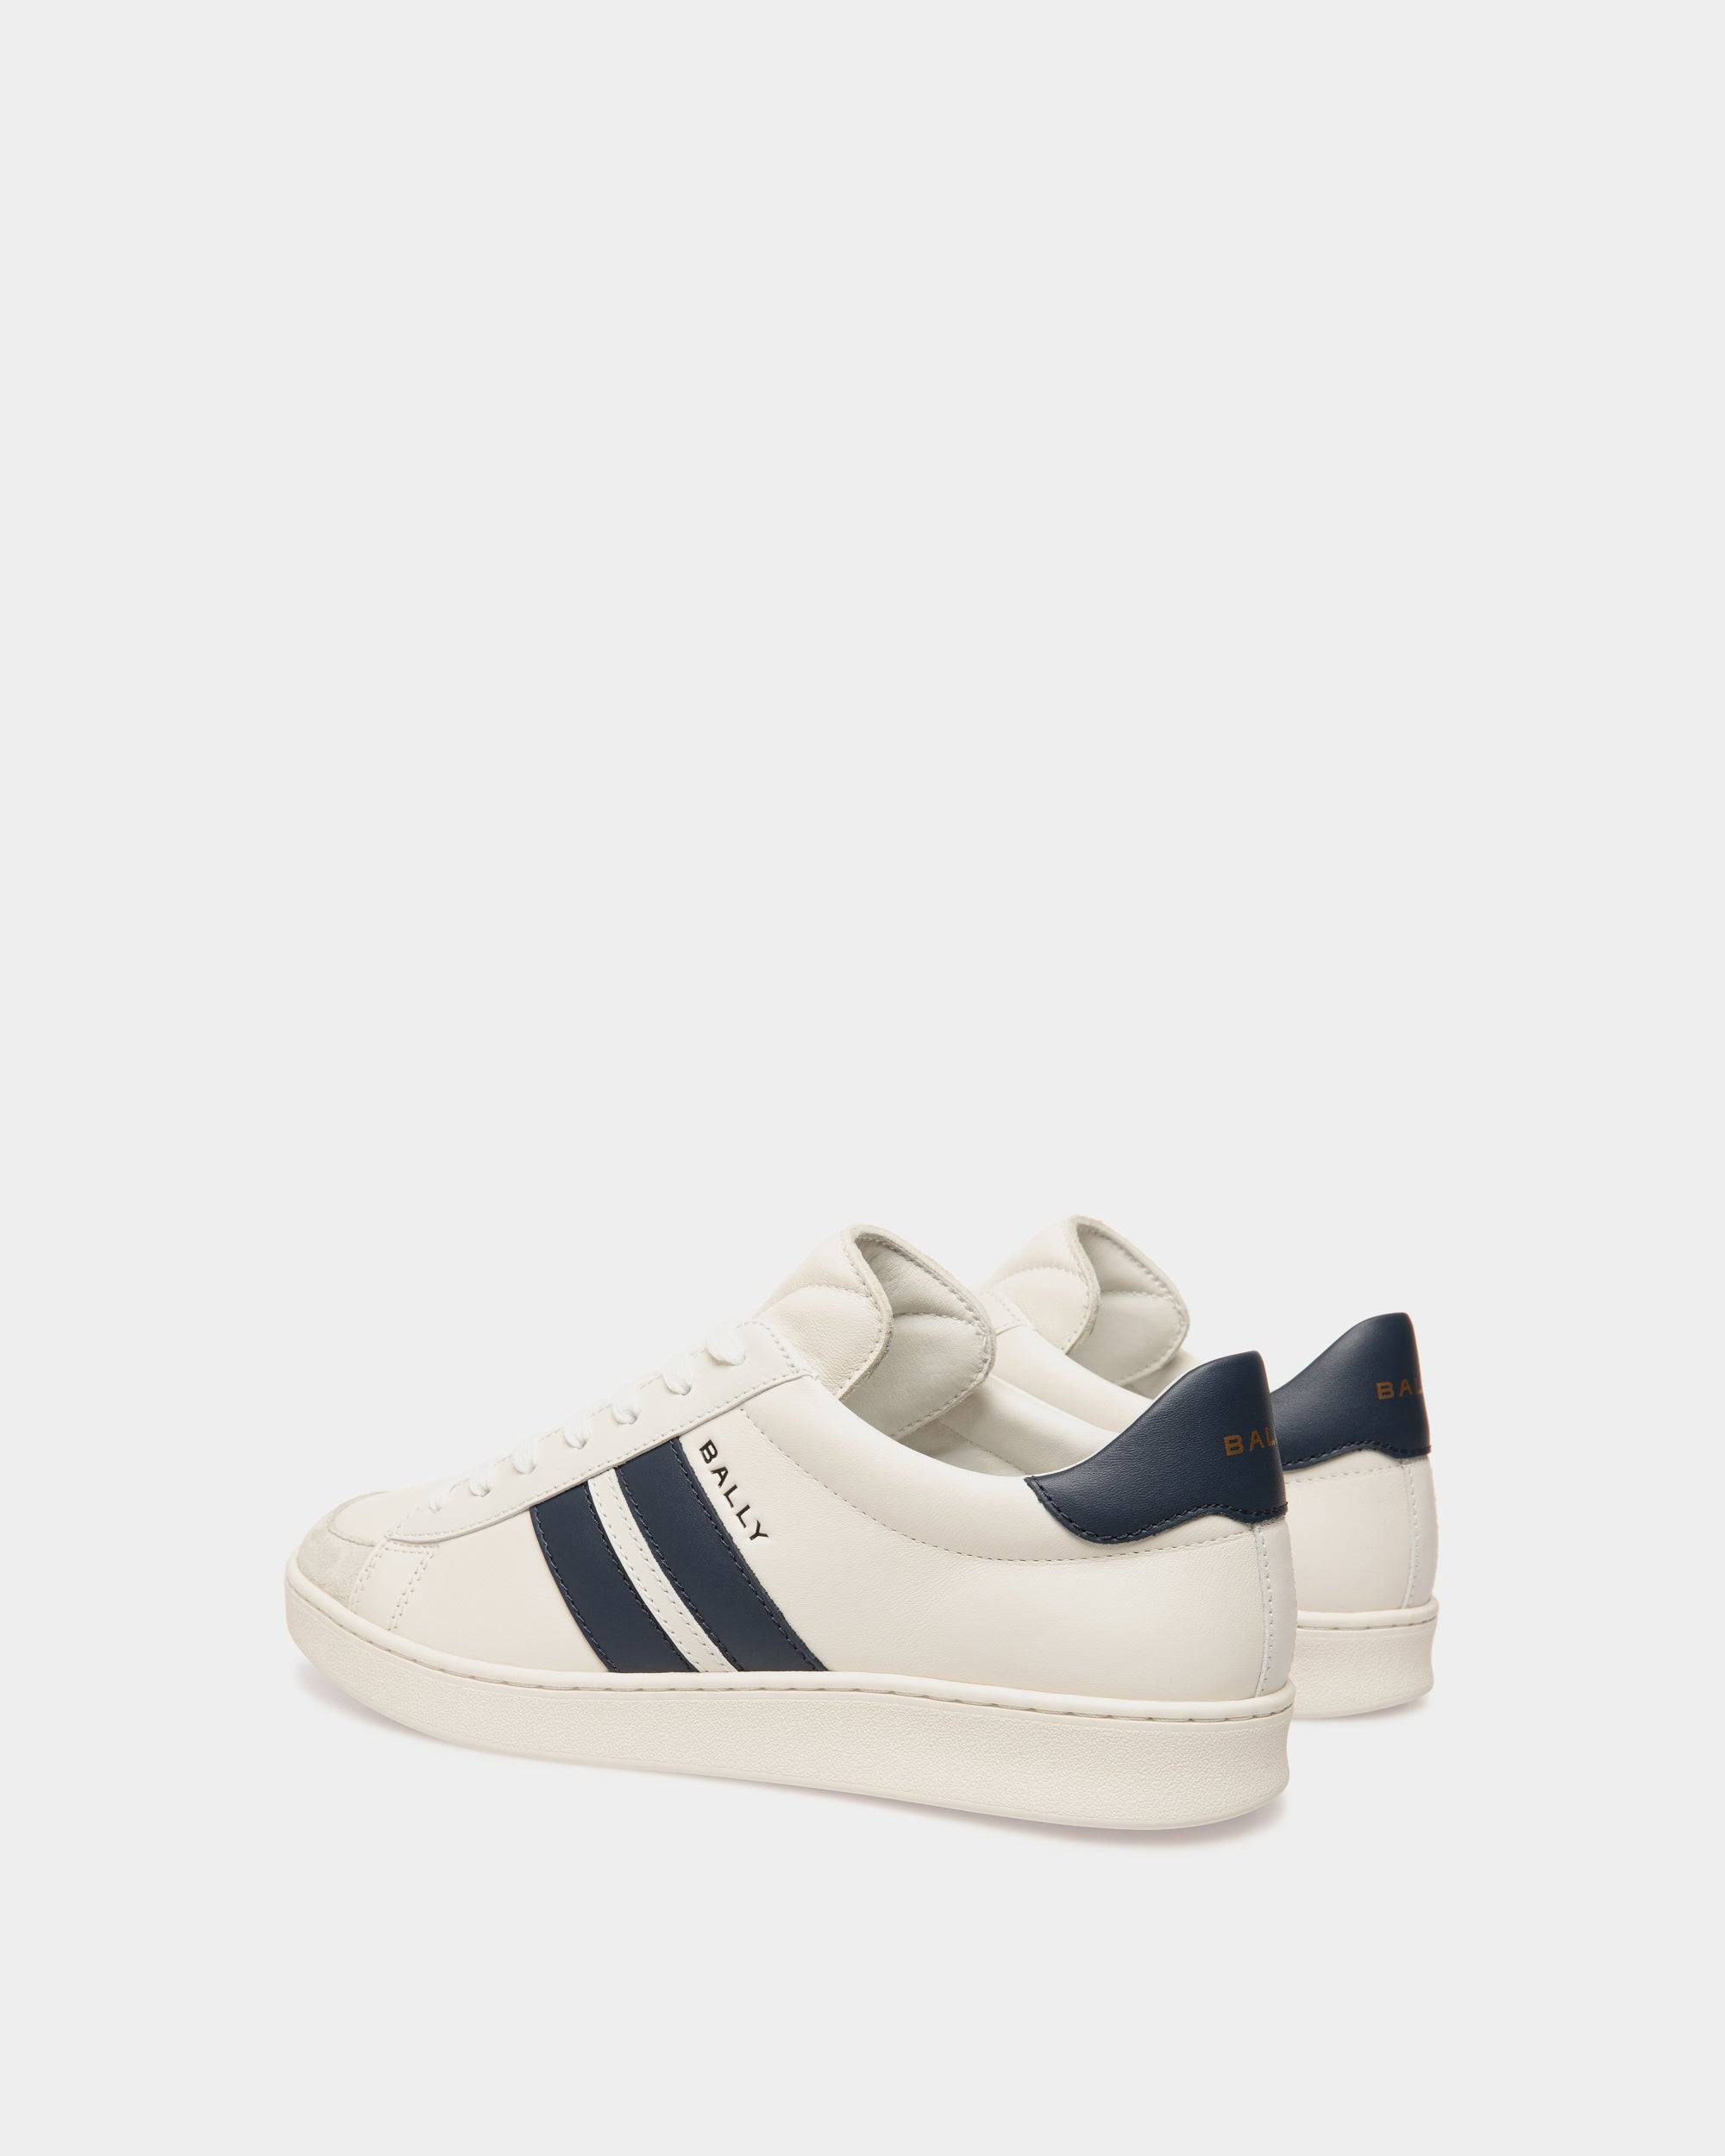 Tennis Sneaker in White and Navy Blue Leather - Men's - Bally - 04